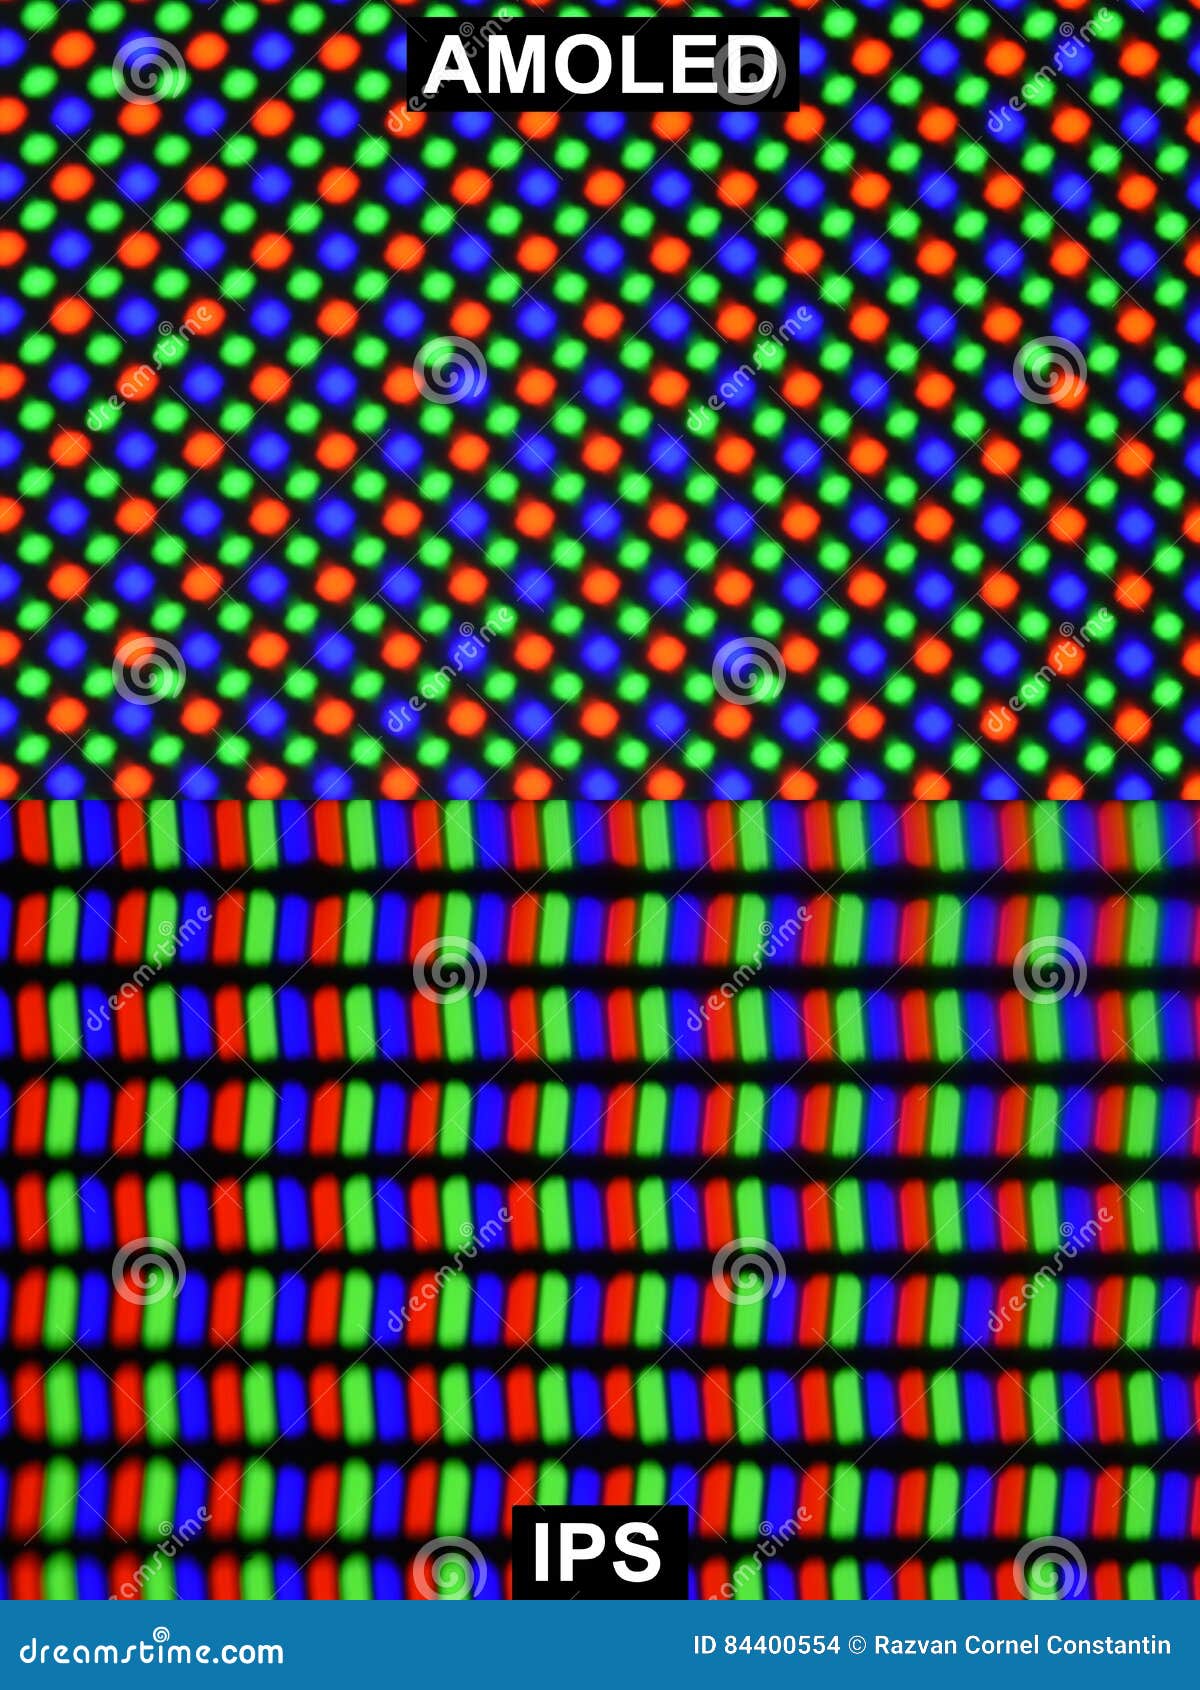 extreme magnification - rgb, ips and amoled screen comparison at 10x